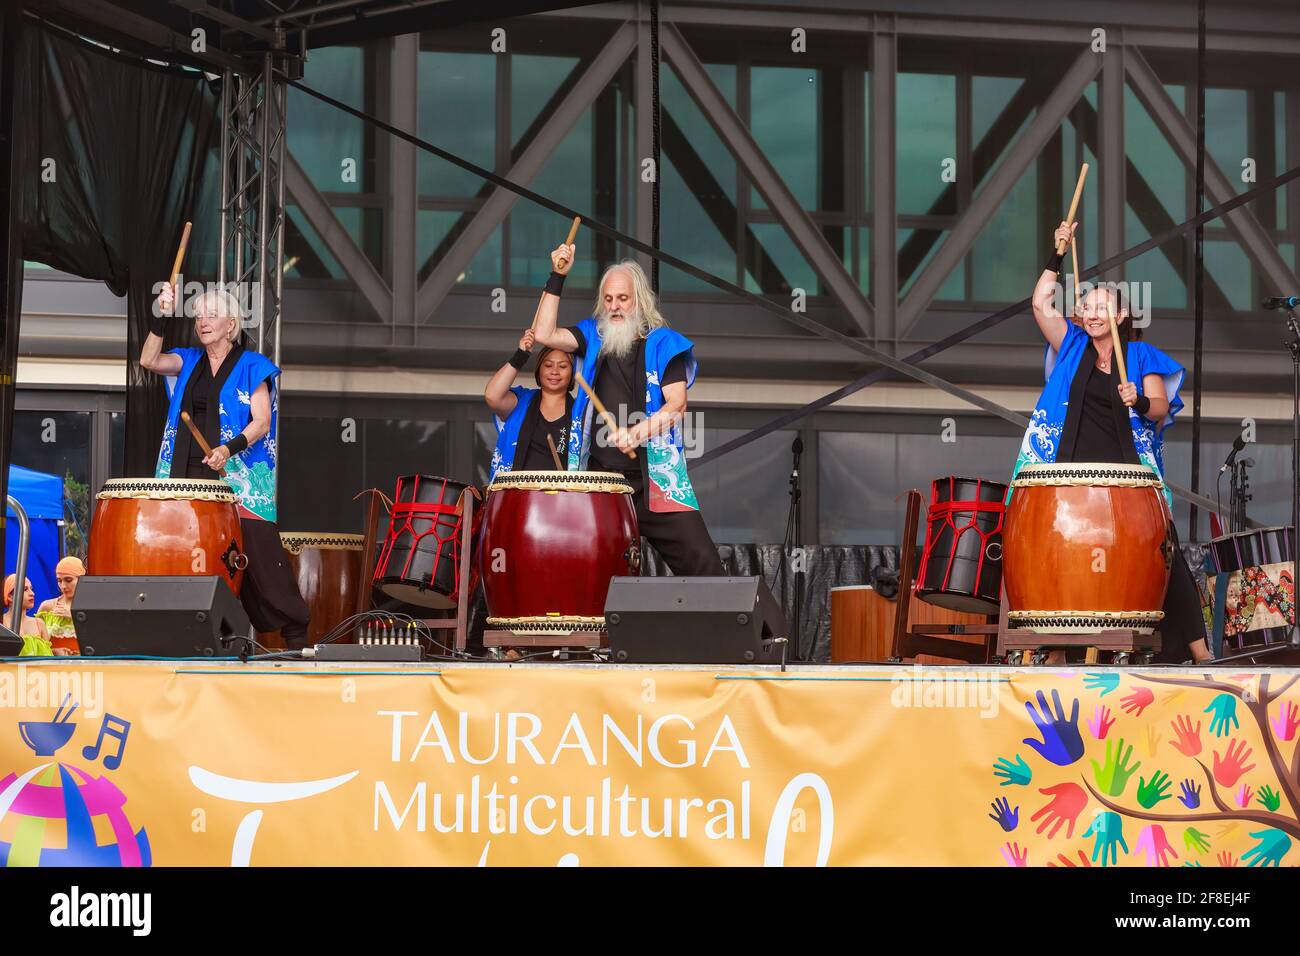 A group of musicians playing taiko (traditional Japanese wooden drums) on stage. Photographed at a multicultural festival in Tauranga, New Zealand Stock Photo